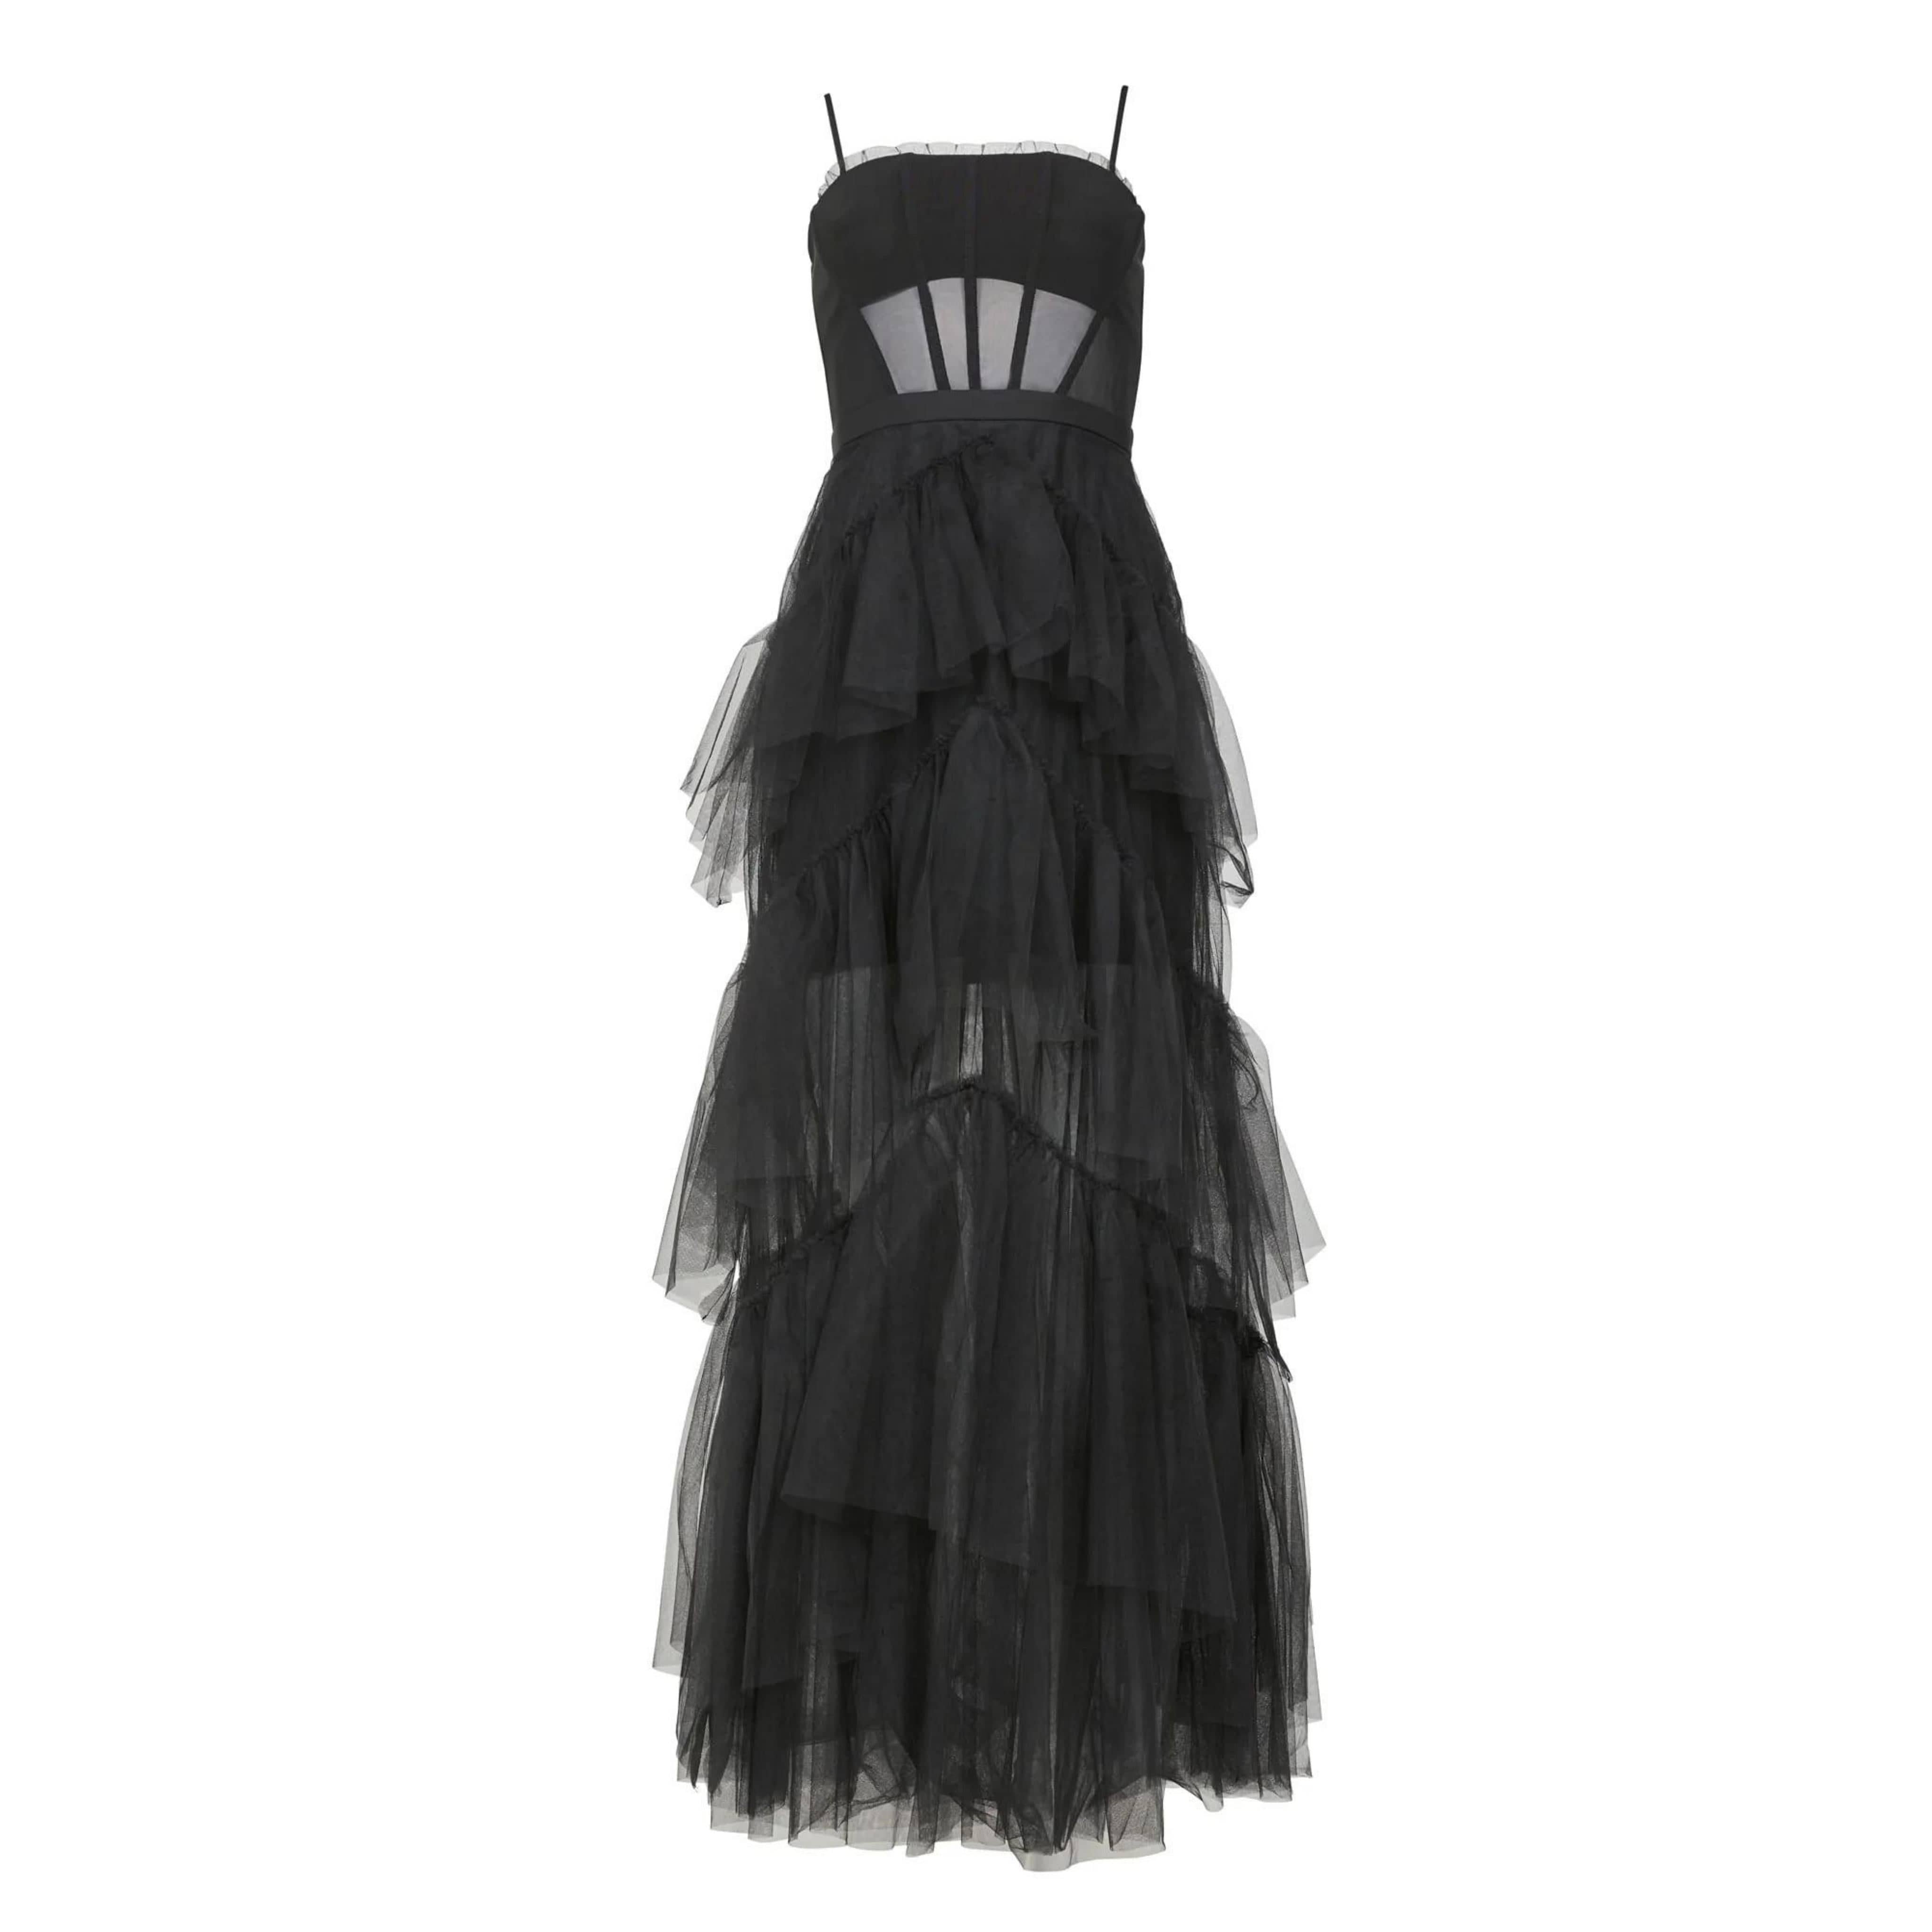 Oly Tiered Ruffle Tulle Evening Gown